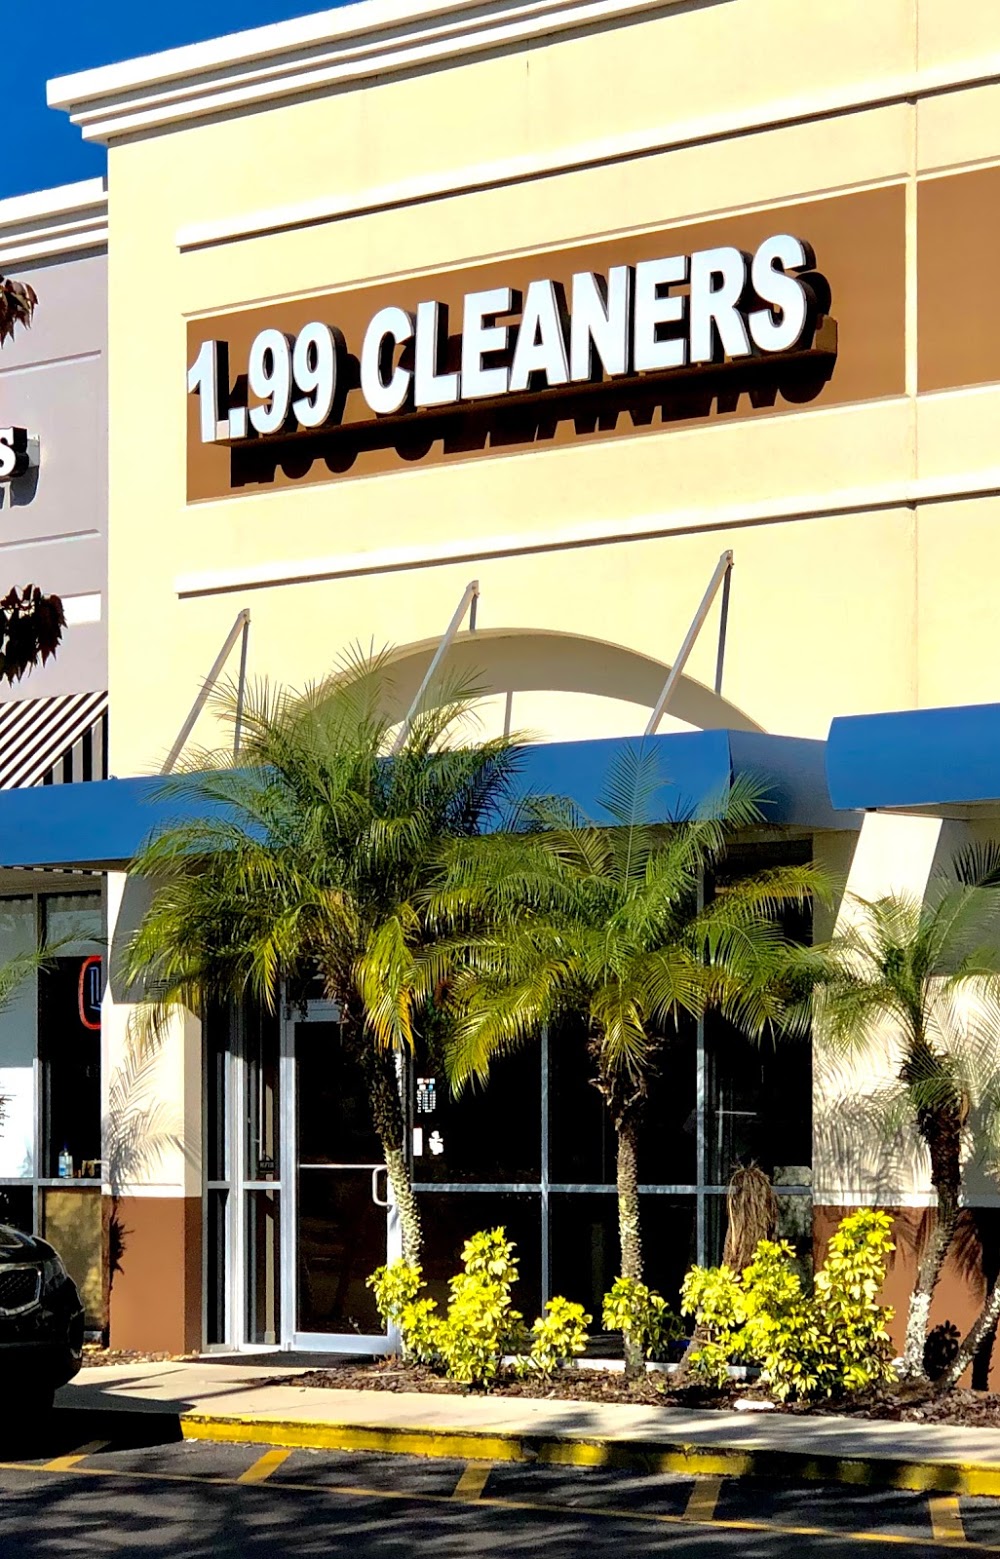 1.99 Cleaners